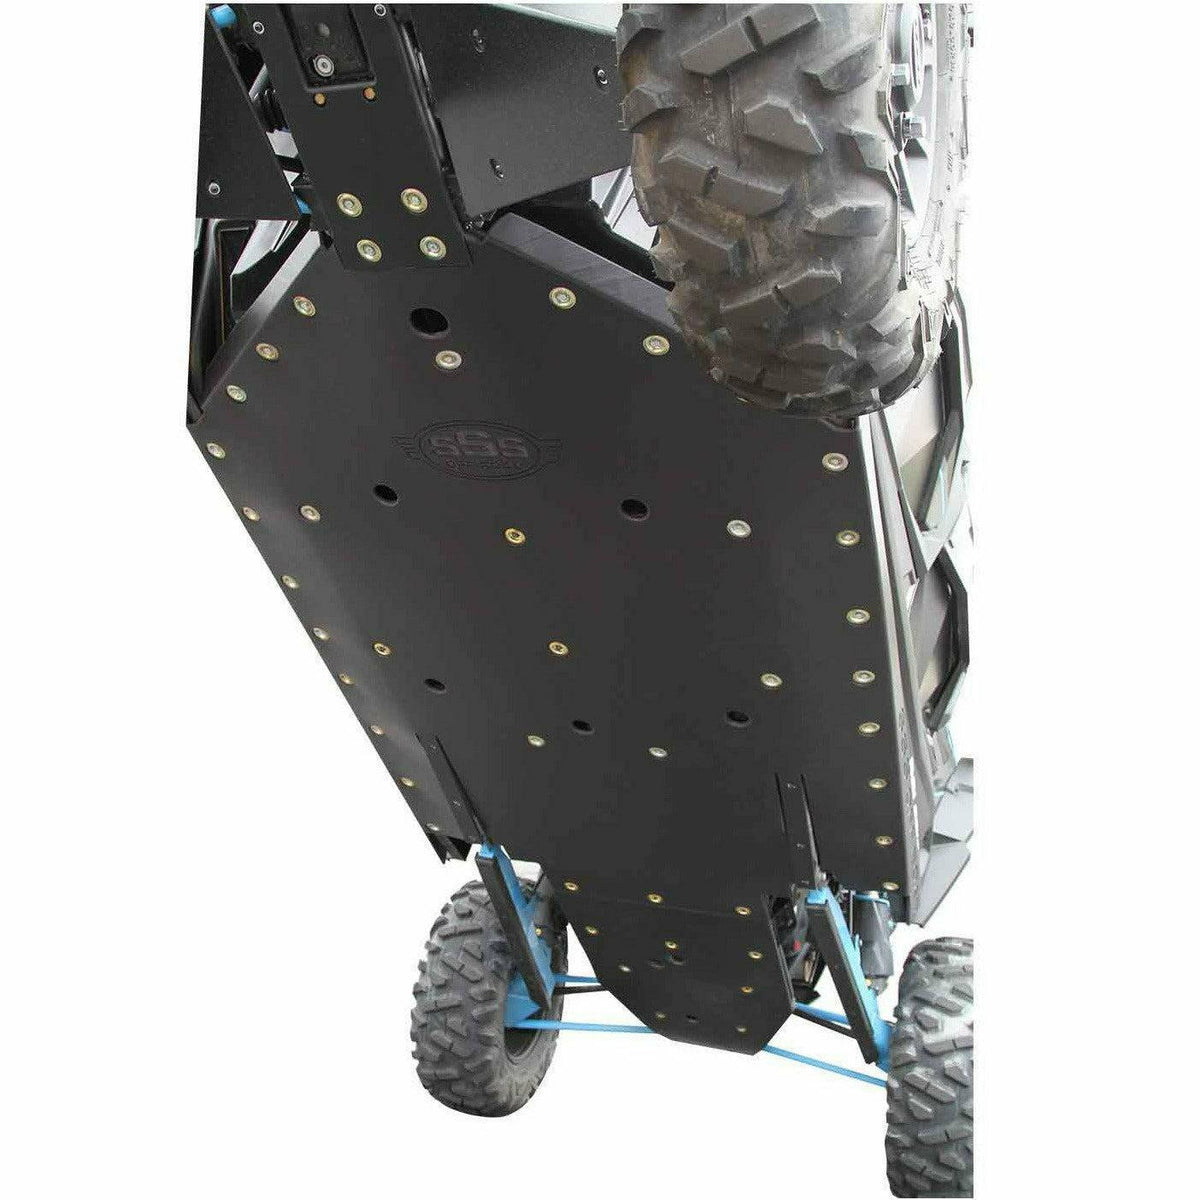 SSS Off-Road UHMW Skid Plate for Polaris RZR XP 4 Turbo S